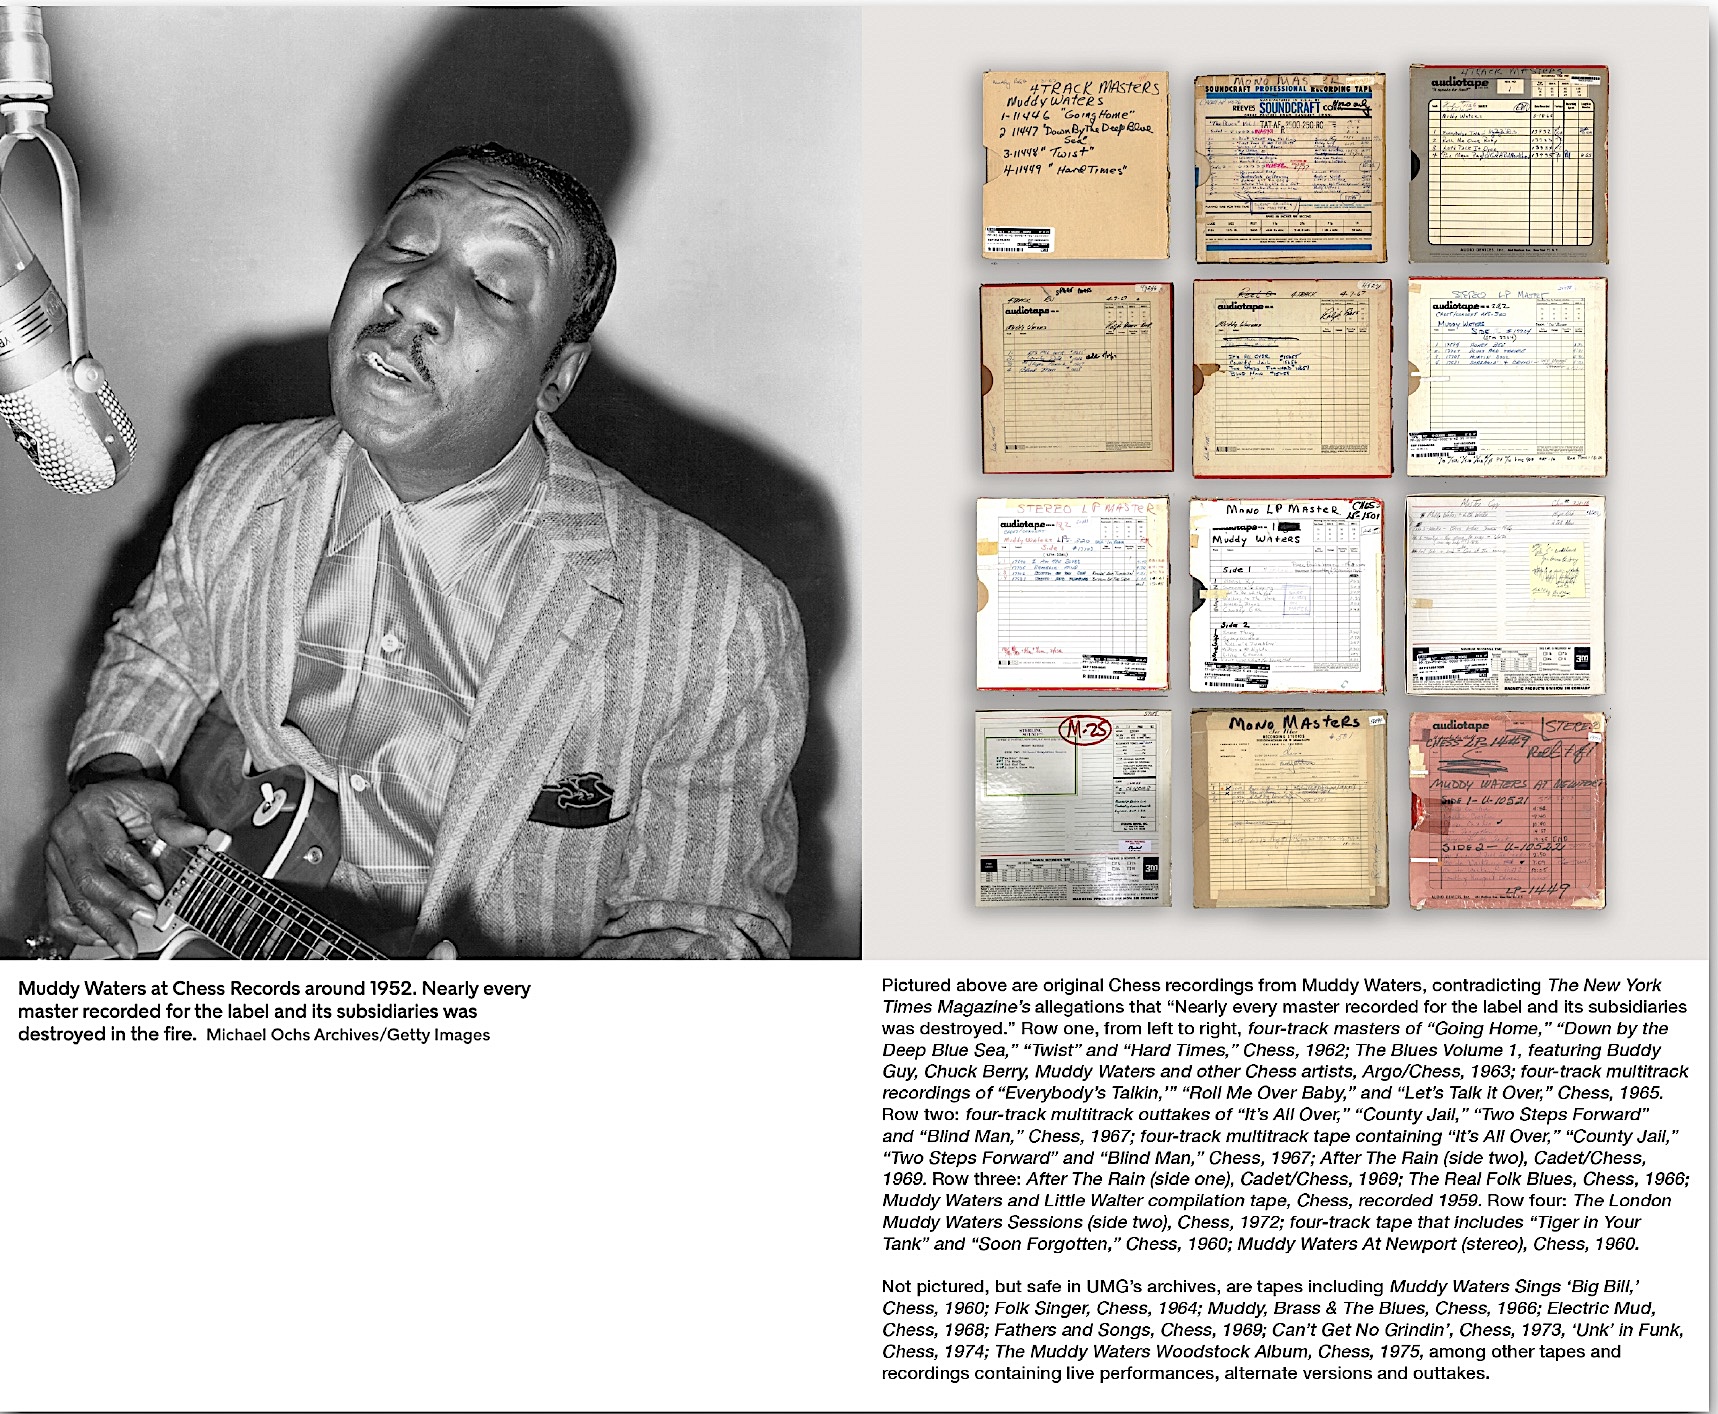 Muddy Waters master tapes